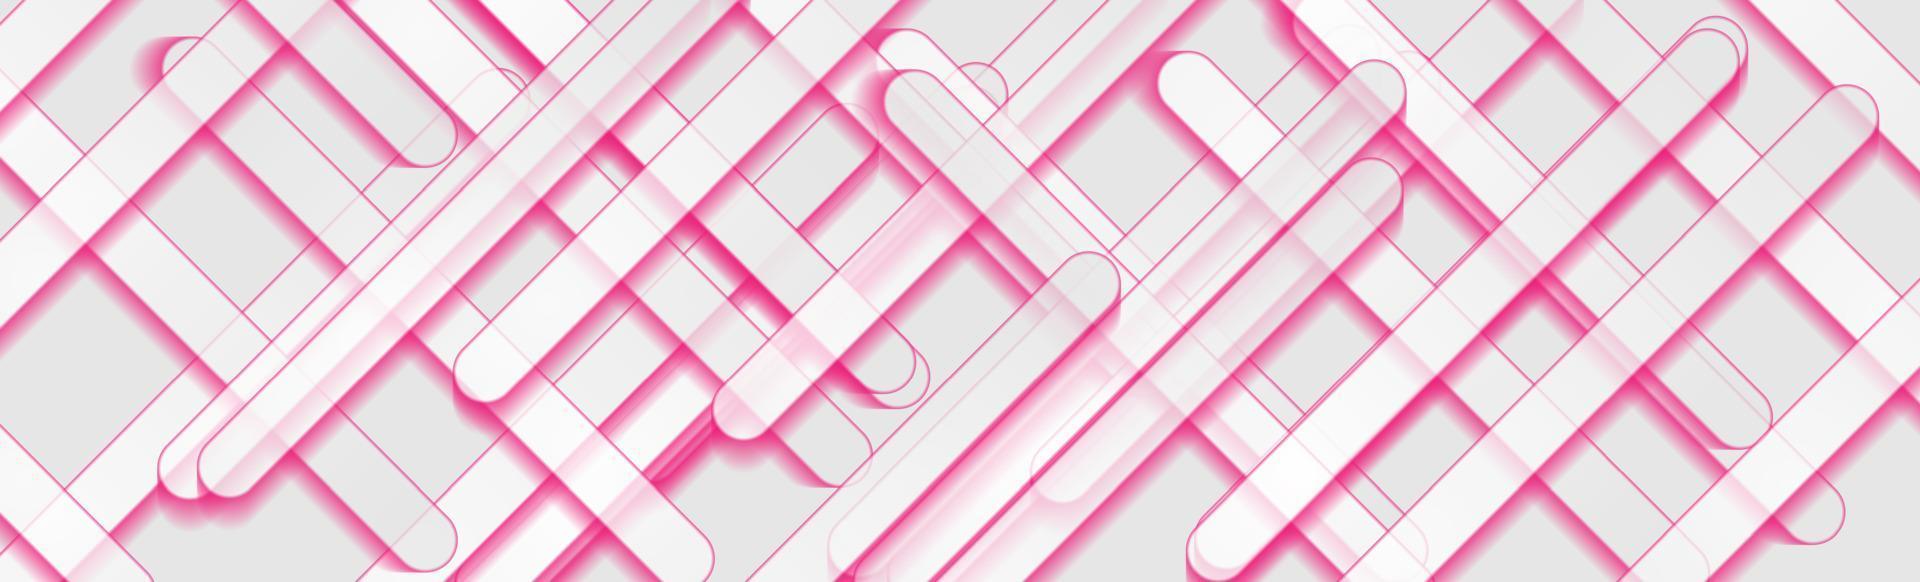 Pink and white stripes abstract tech banner background vector